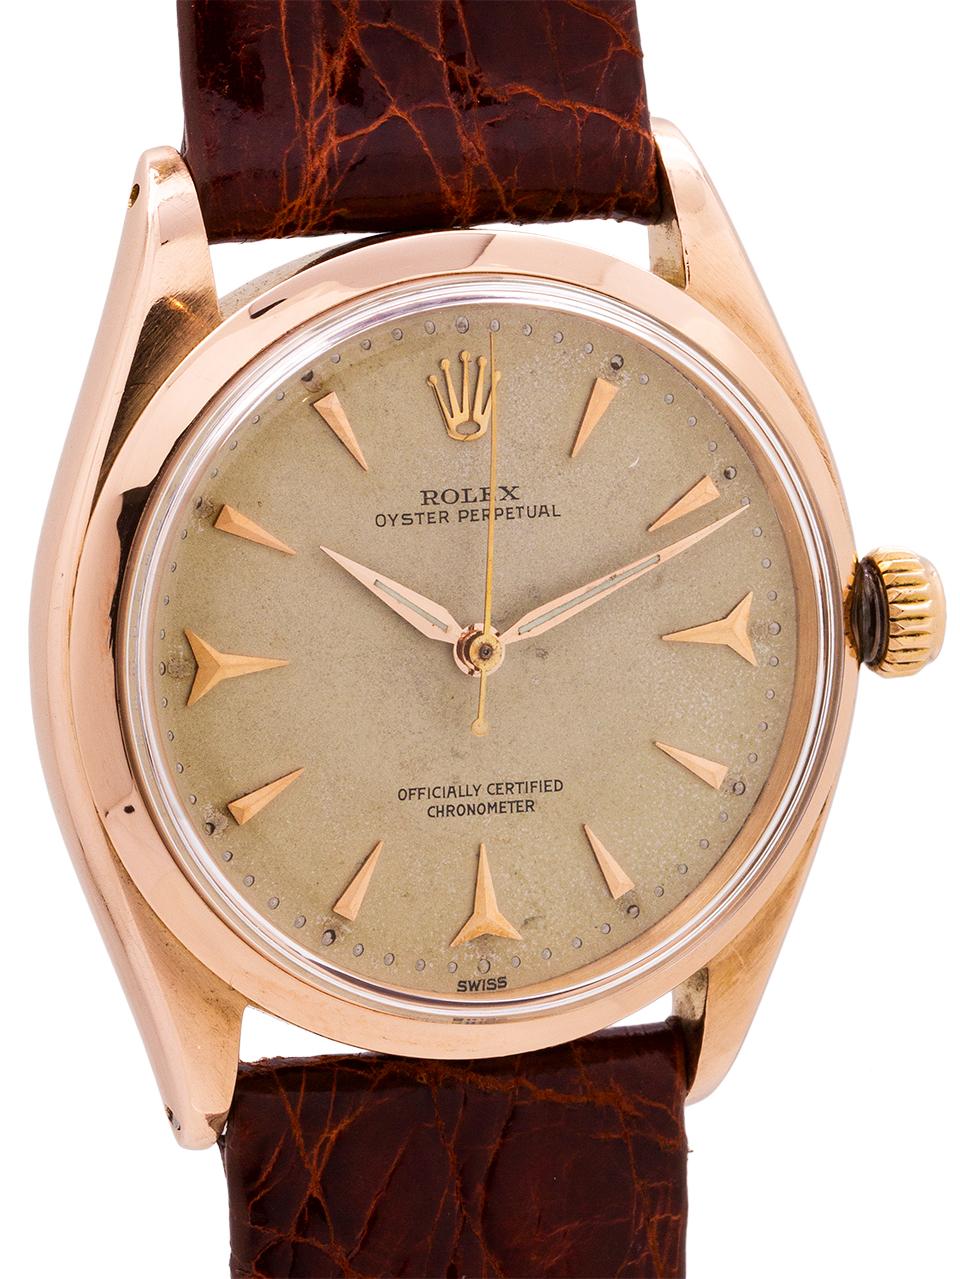 
Rolex 18K rose gold Oyster Perpetual reference# 6564 serial# 157,xxx circa 1956. Featuring  a 34mm diameter case with smooth bezel with acrylic crystal and an especially beautiful condition original matte salmon dial with rose gold applied shark’s